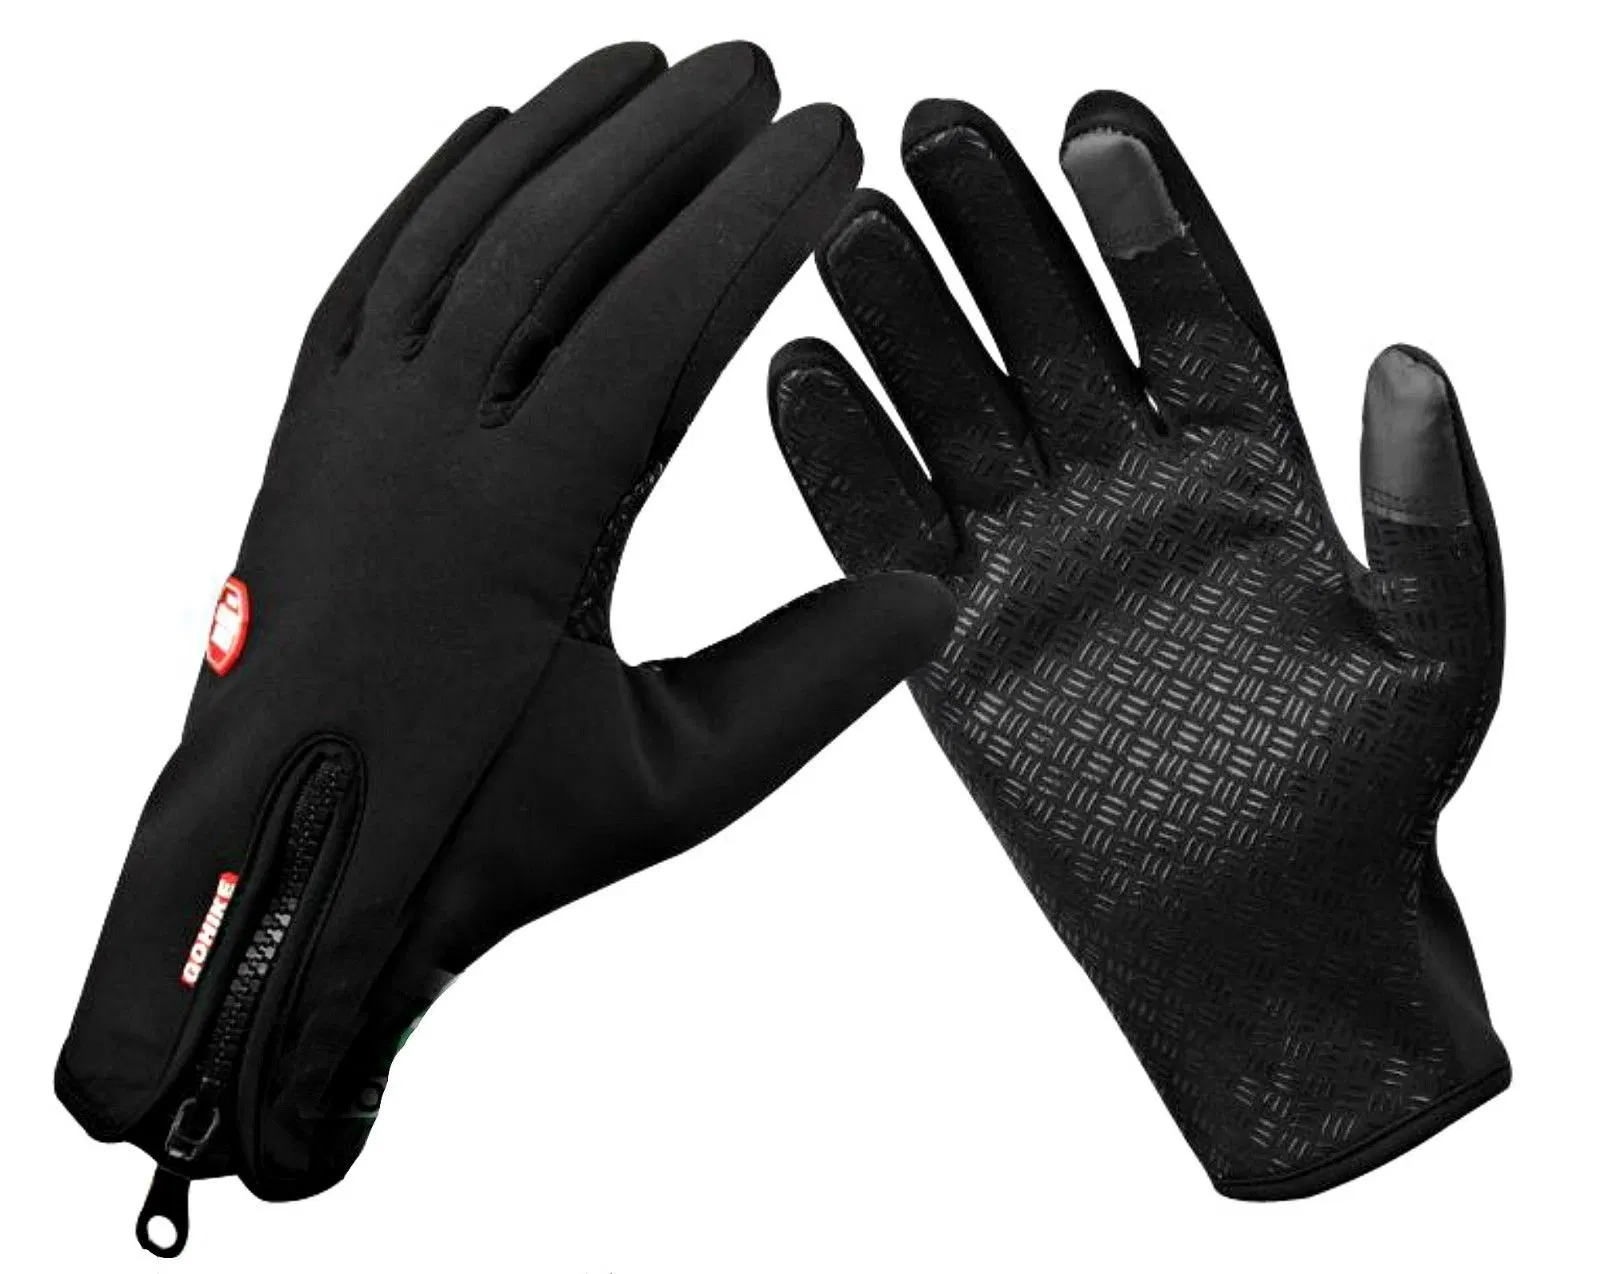 Magic Touchscreen, Texting Winter Gloves for iPhone & Smartphone for Hand Health